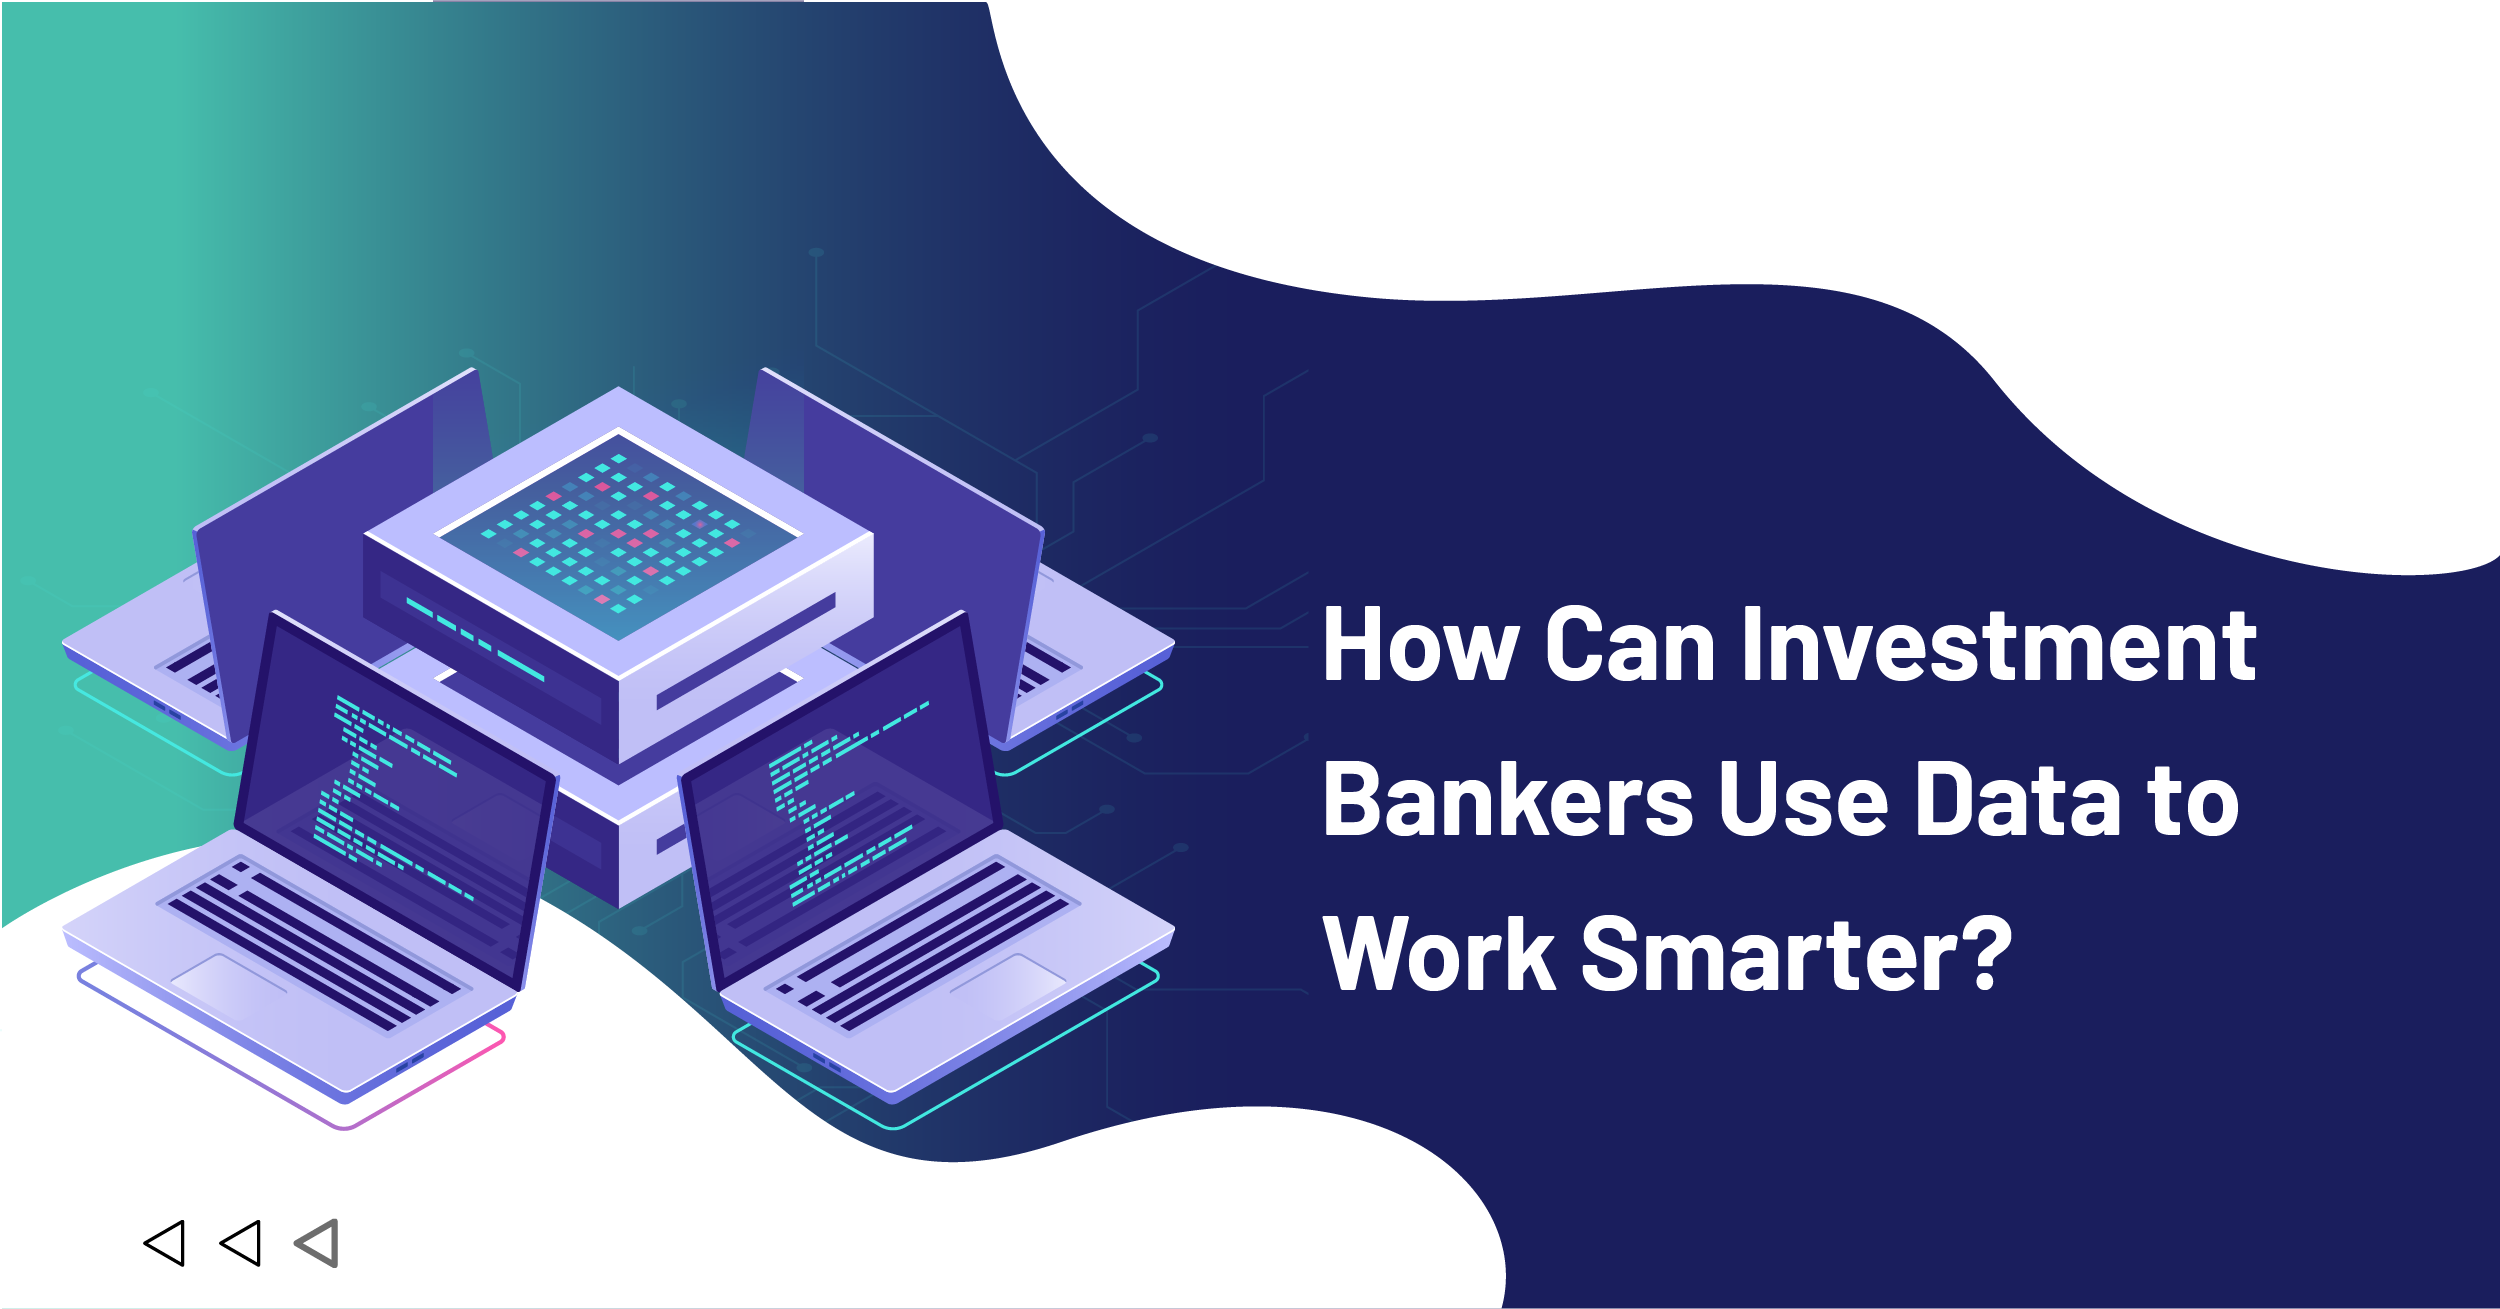 How Can Investment Bankers Use Data to Work Smarter